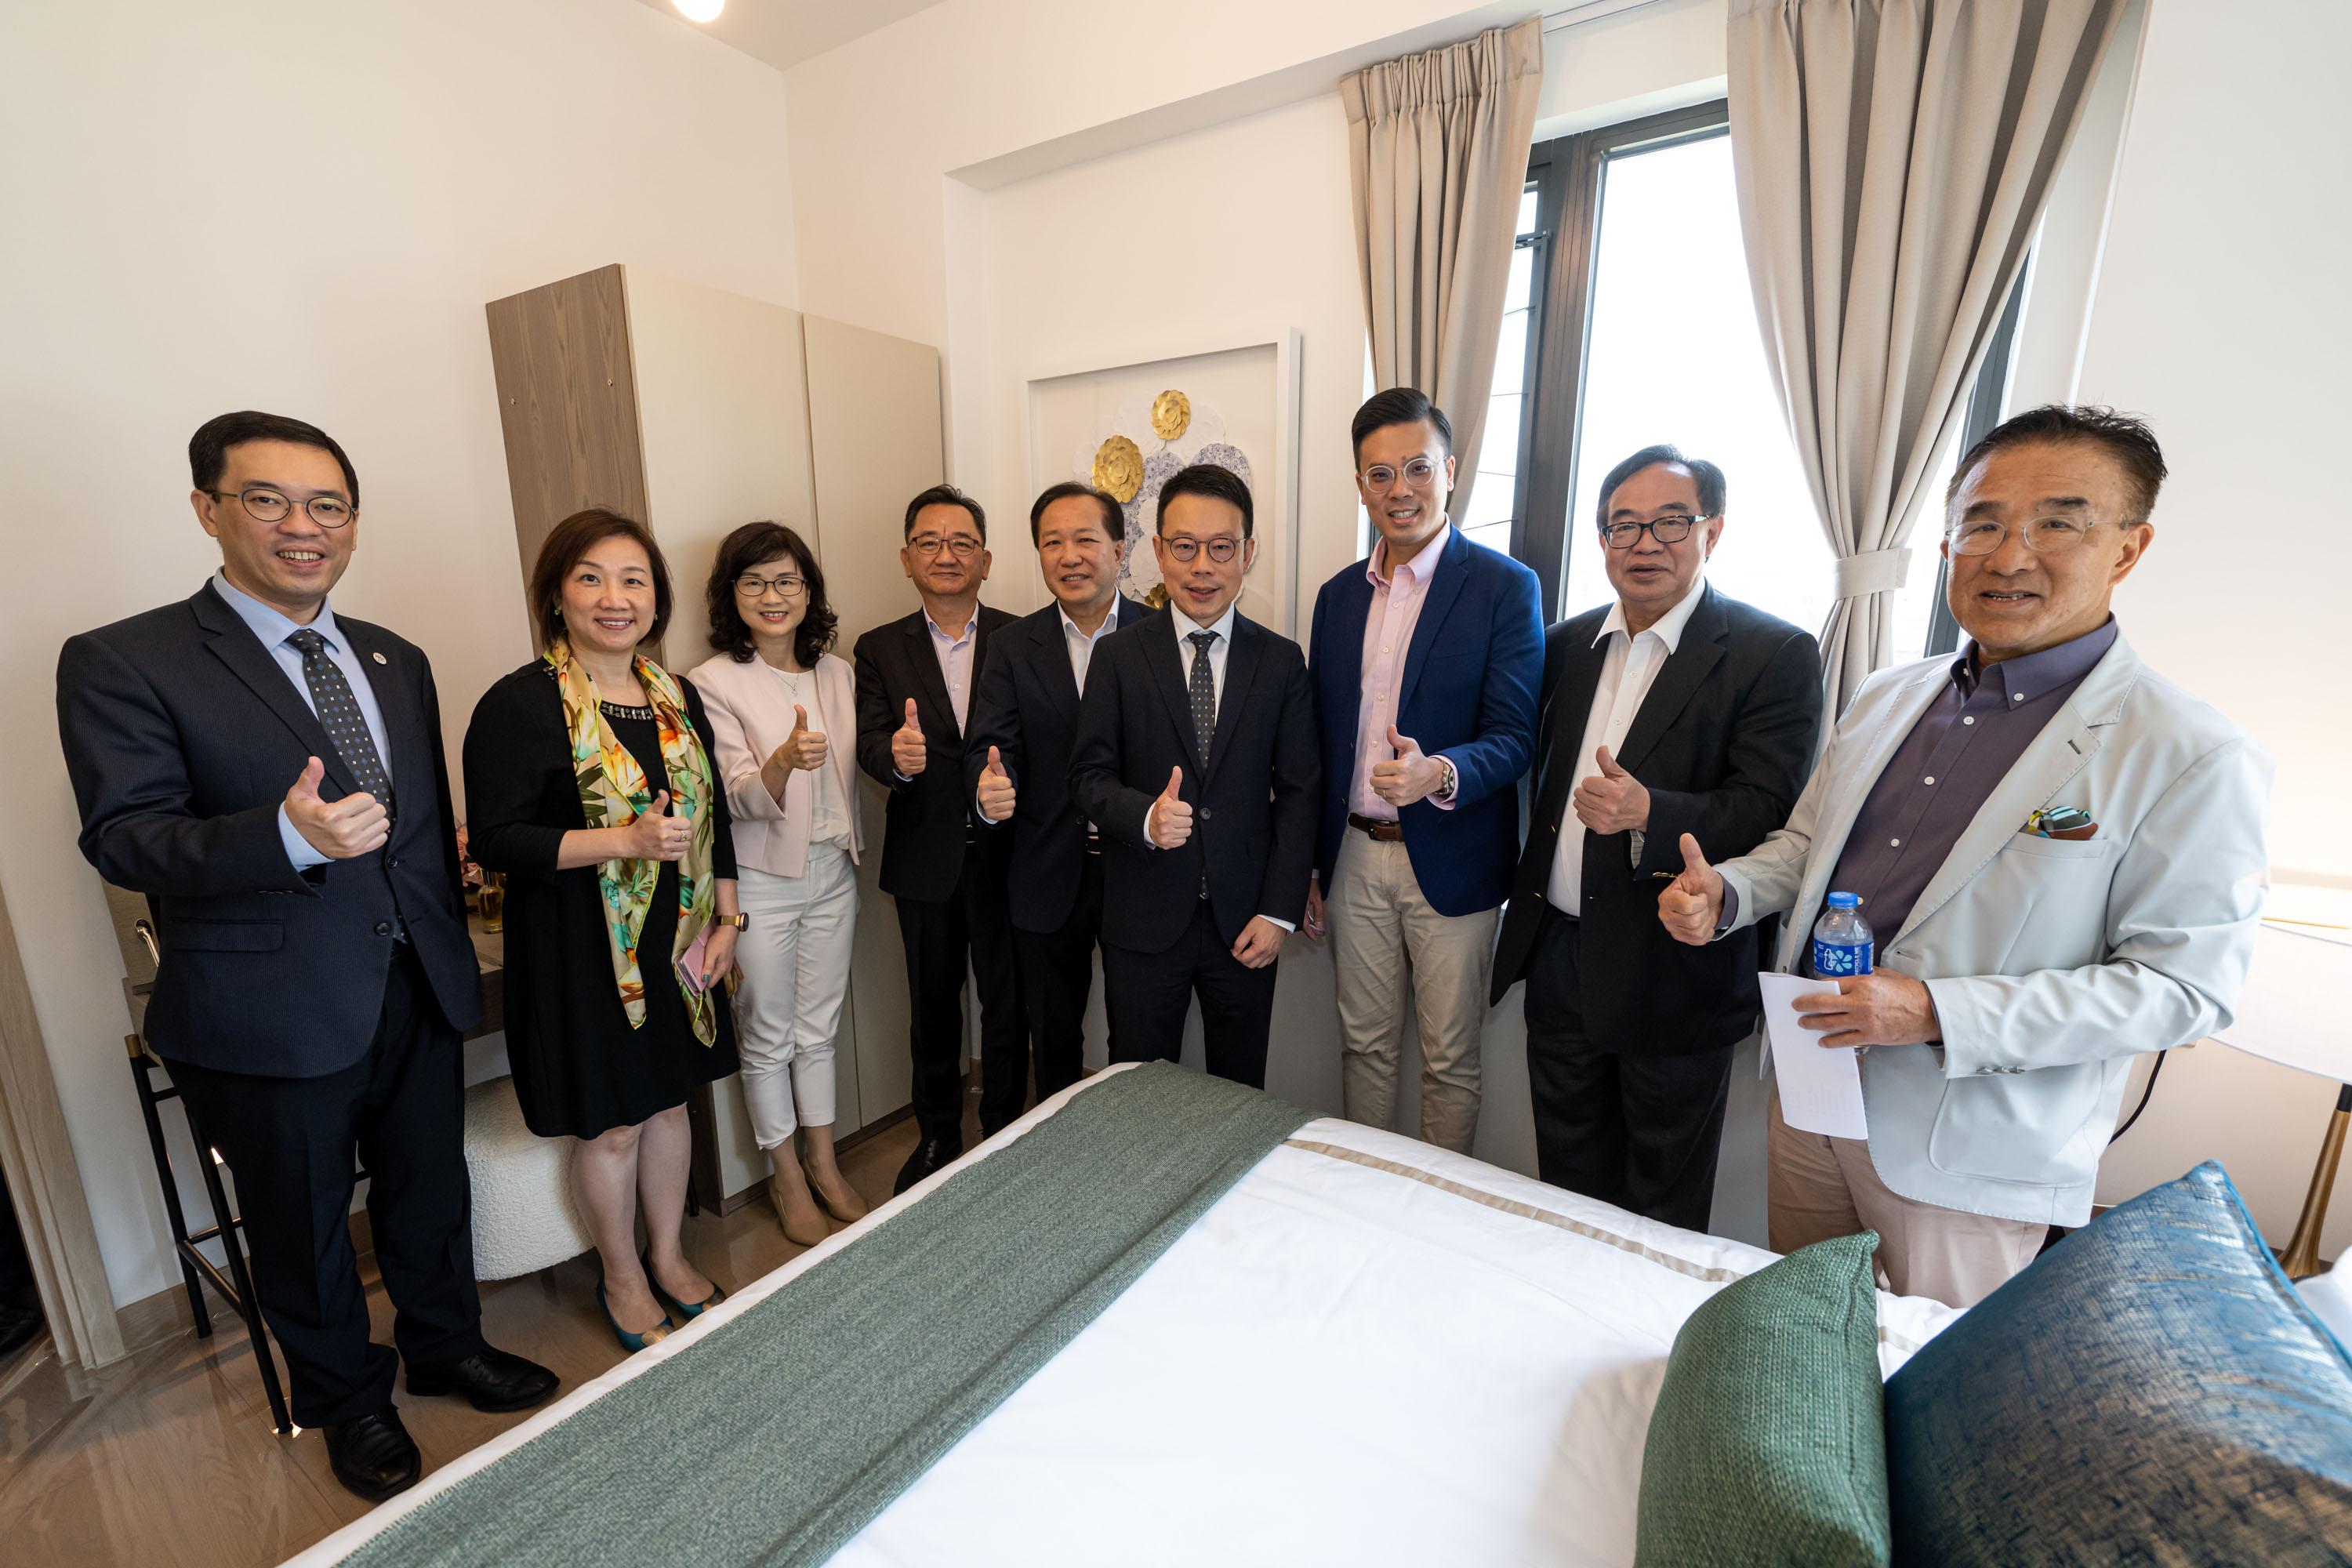 The Legislative Council (LegCo) Panel on Housing visited the Blissful Place of the Hong Kong Housing Society (HKHS) in Hung Hom today (June 2). Photo shows LegCo Members posing for a group photo with representatives of HKHS at a show flat.

